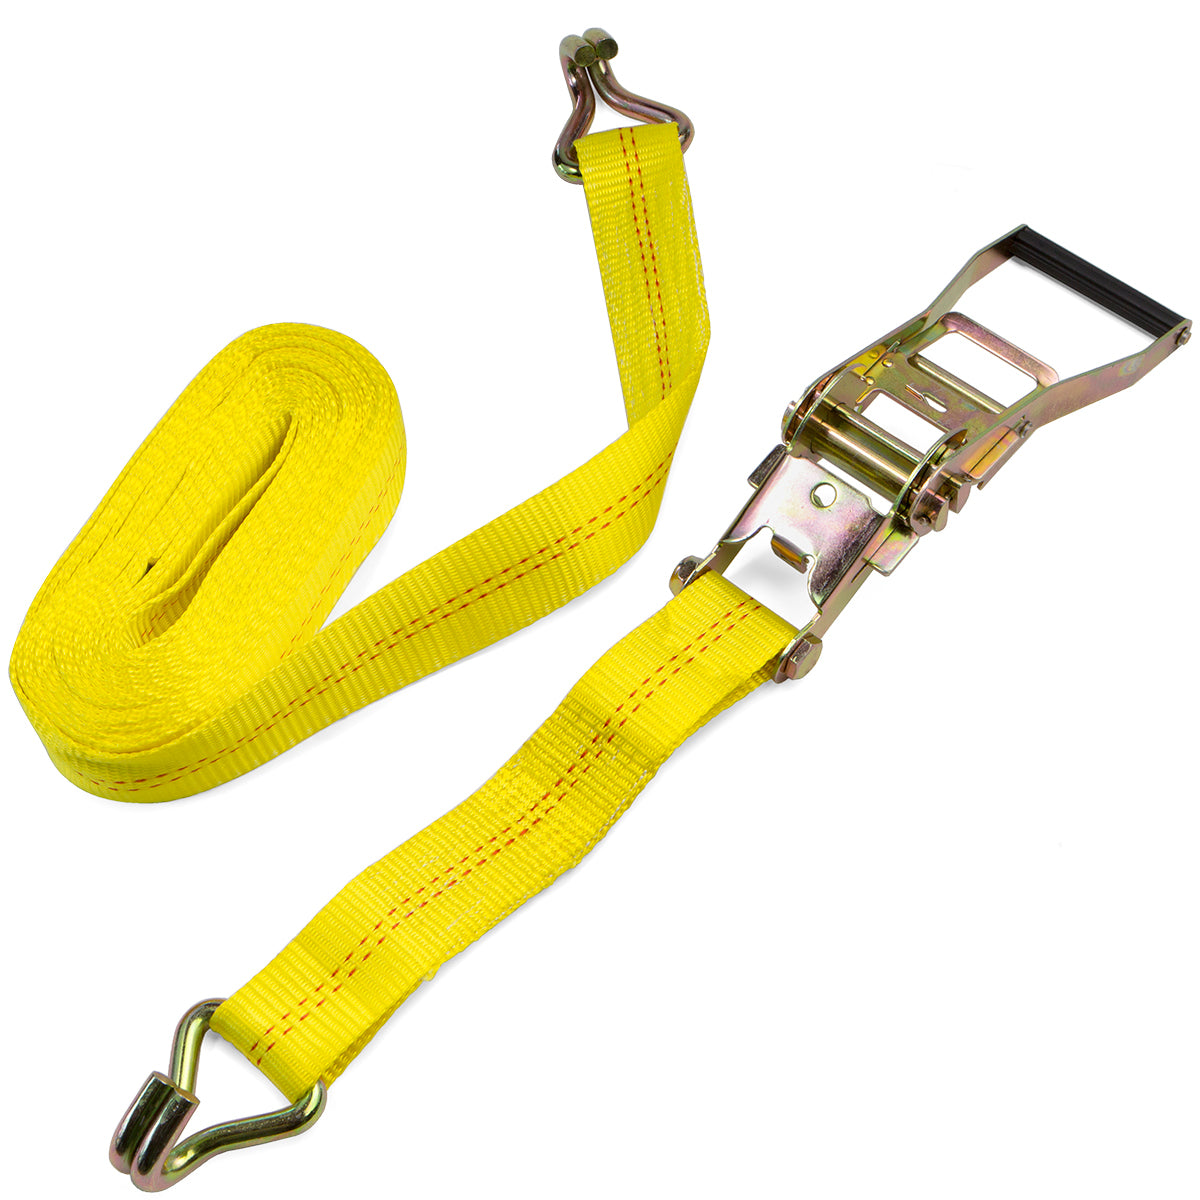 2 x 27' Tie Down Ratchet Strap w/ J-Hook Truck Towing Cargo Hauling 1 –  XtremepowerUS